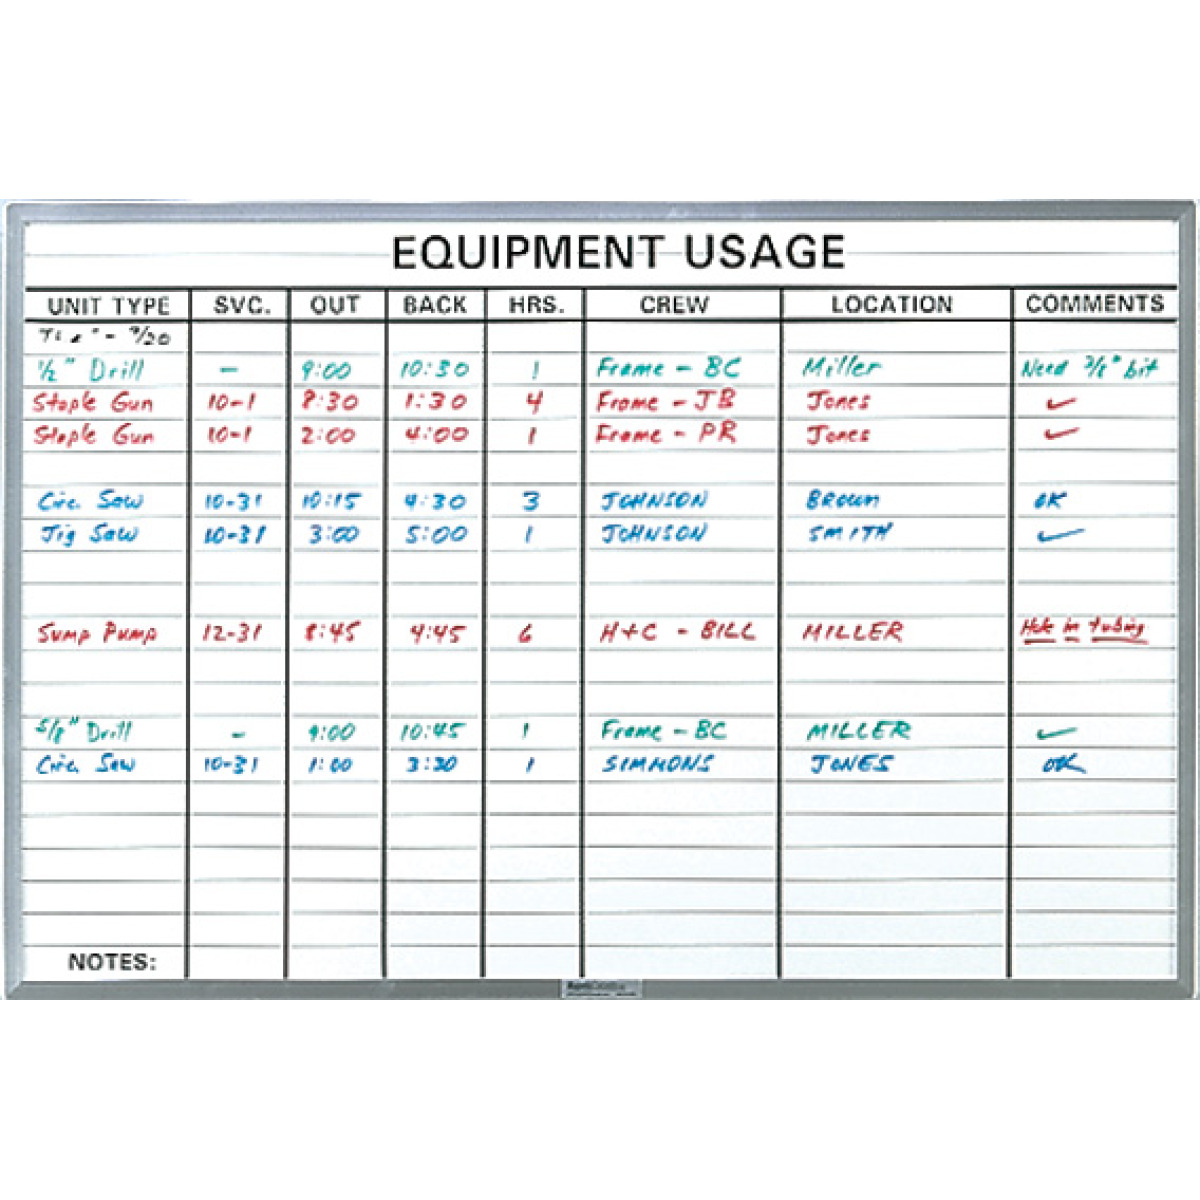 lined whiteboard for reviewing equipment usage